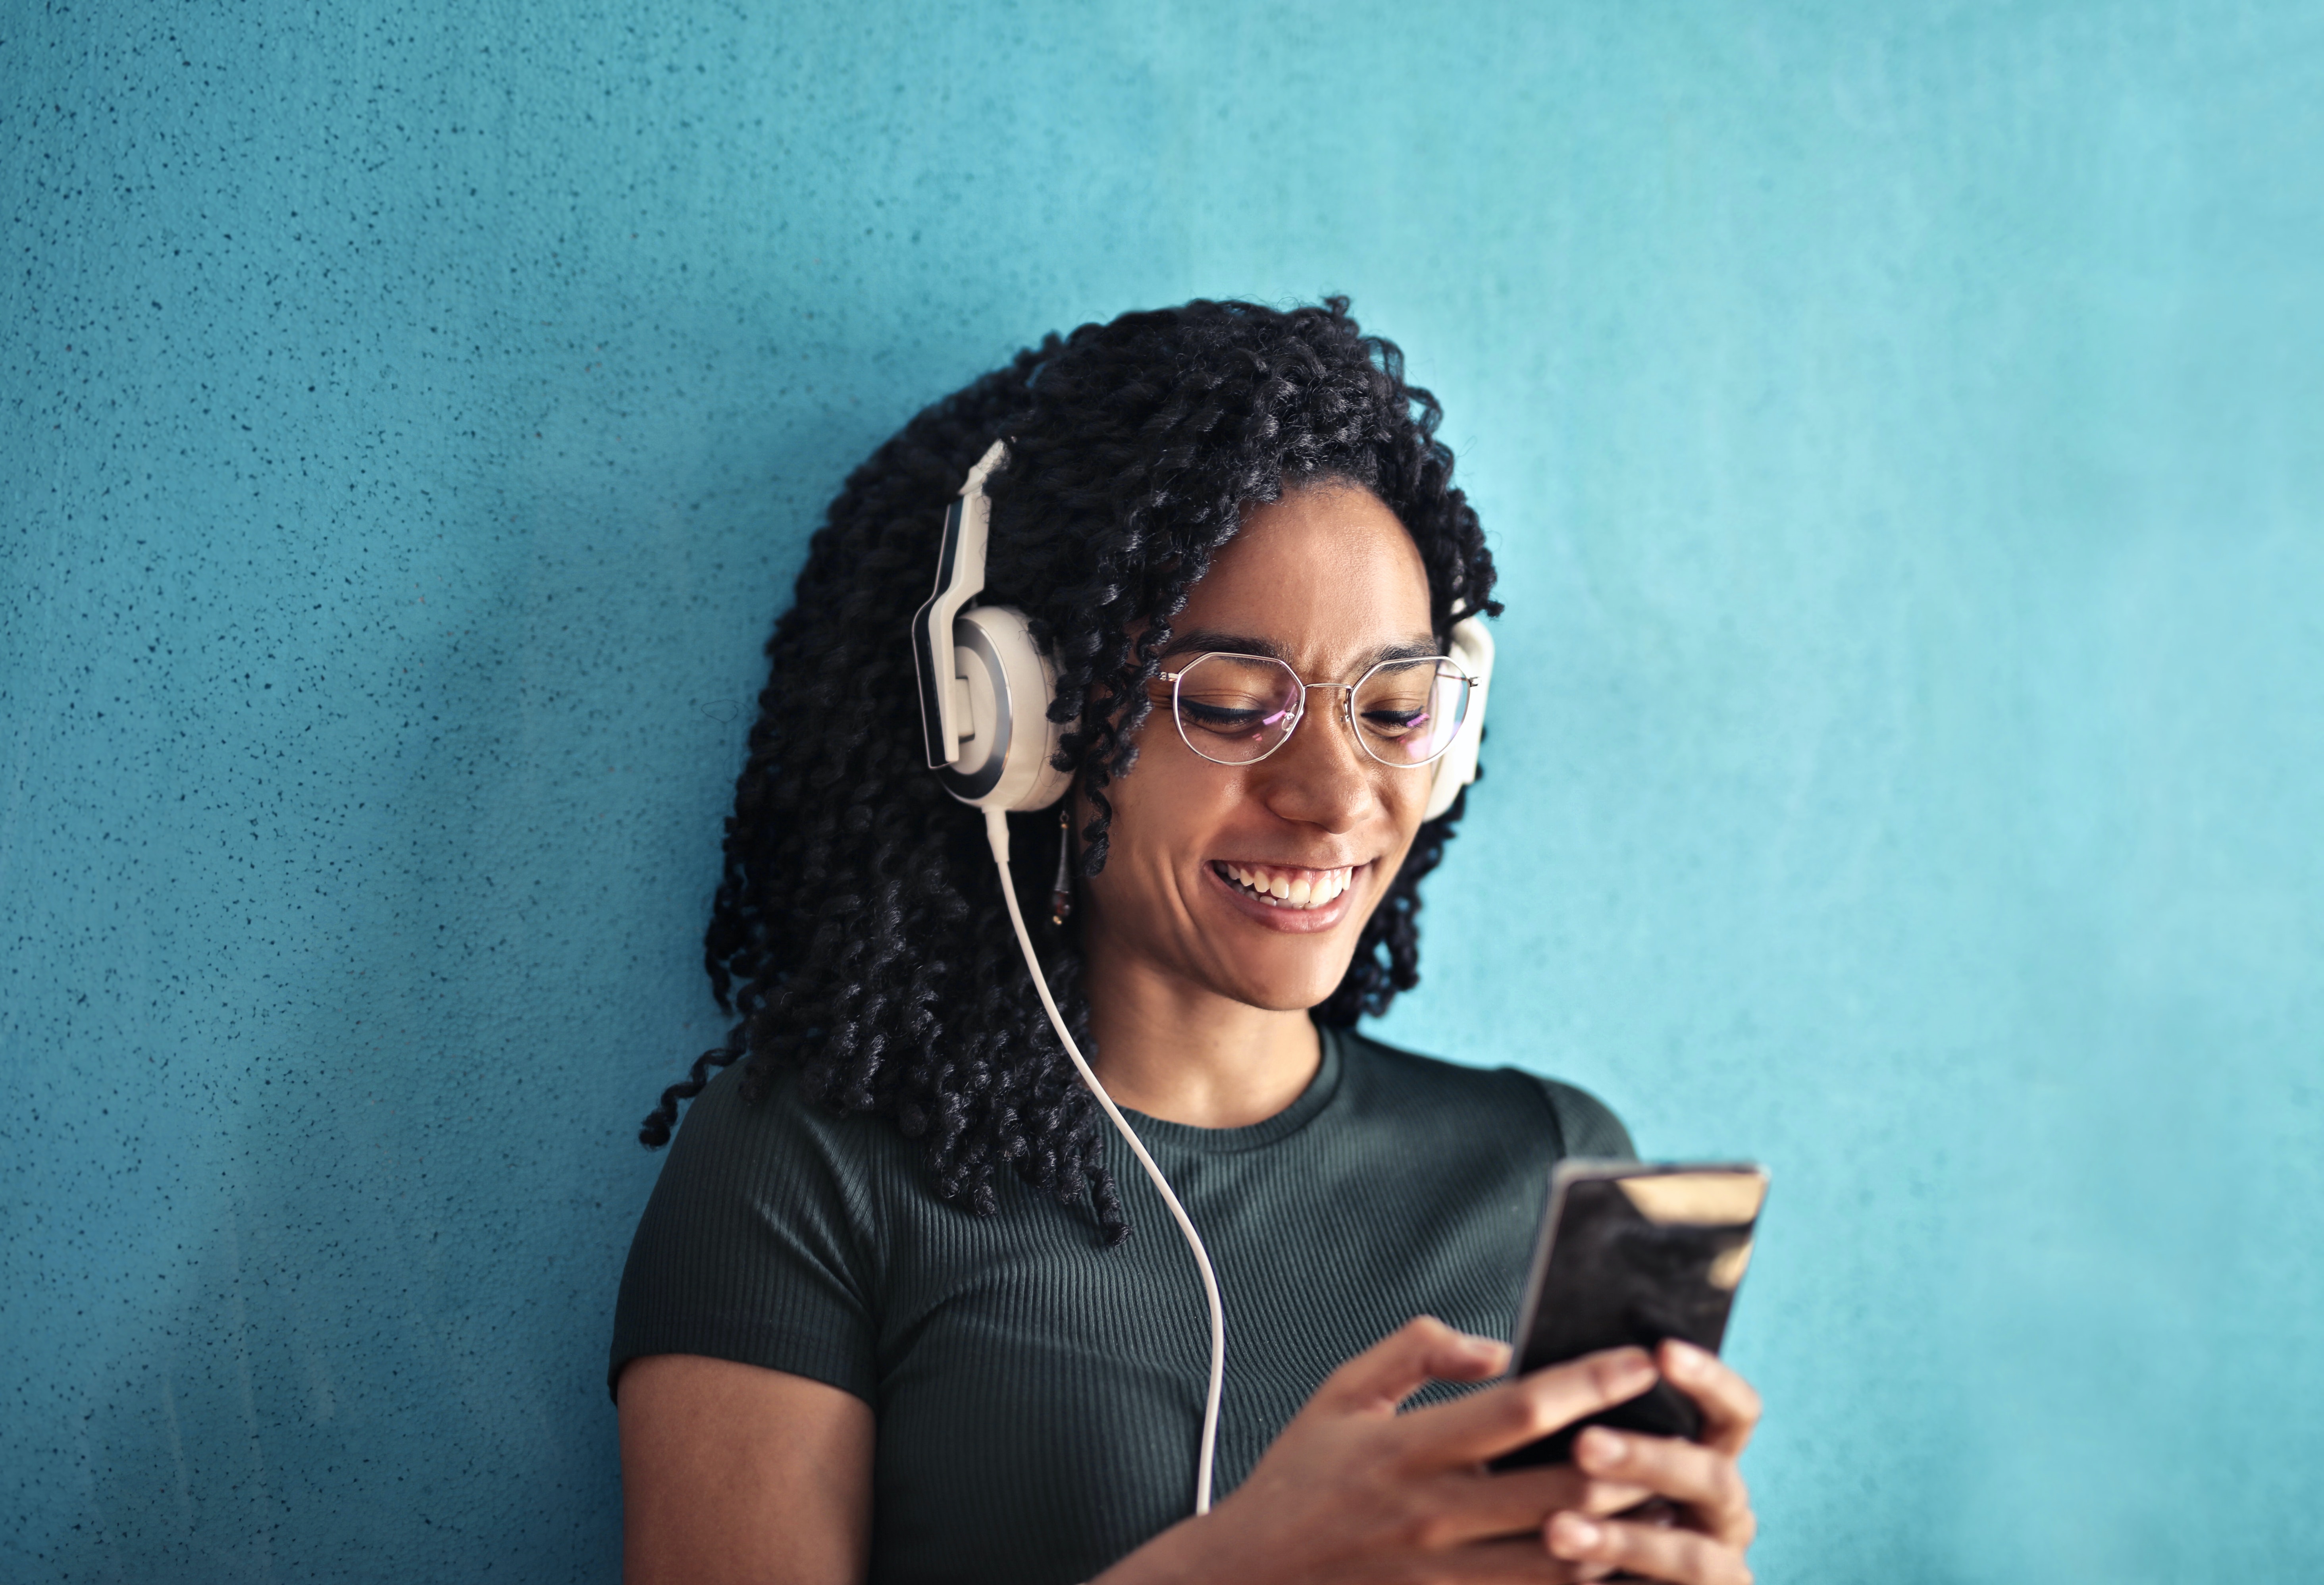 ’What if I’m listening to music?’ and other common questions about AudioMob ads